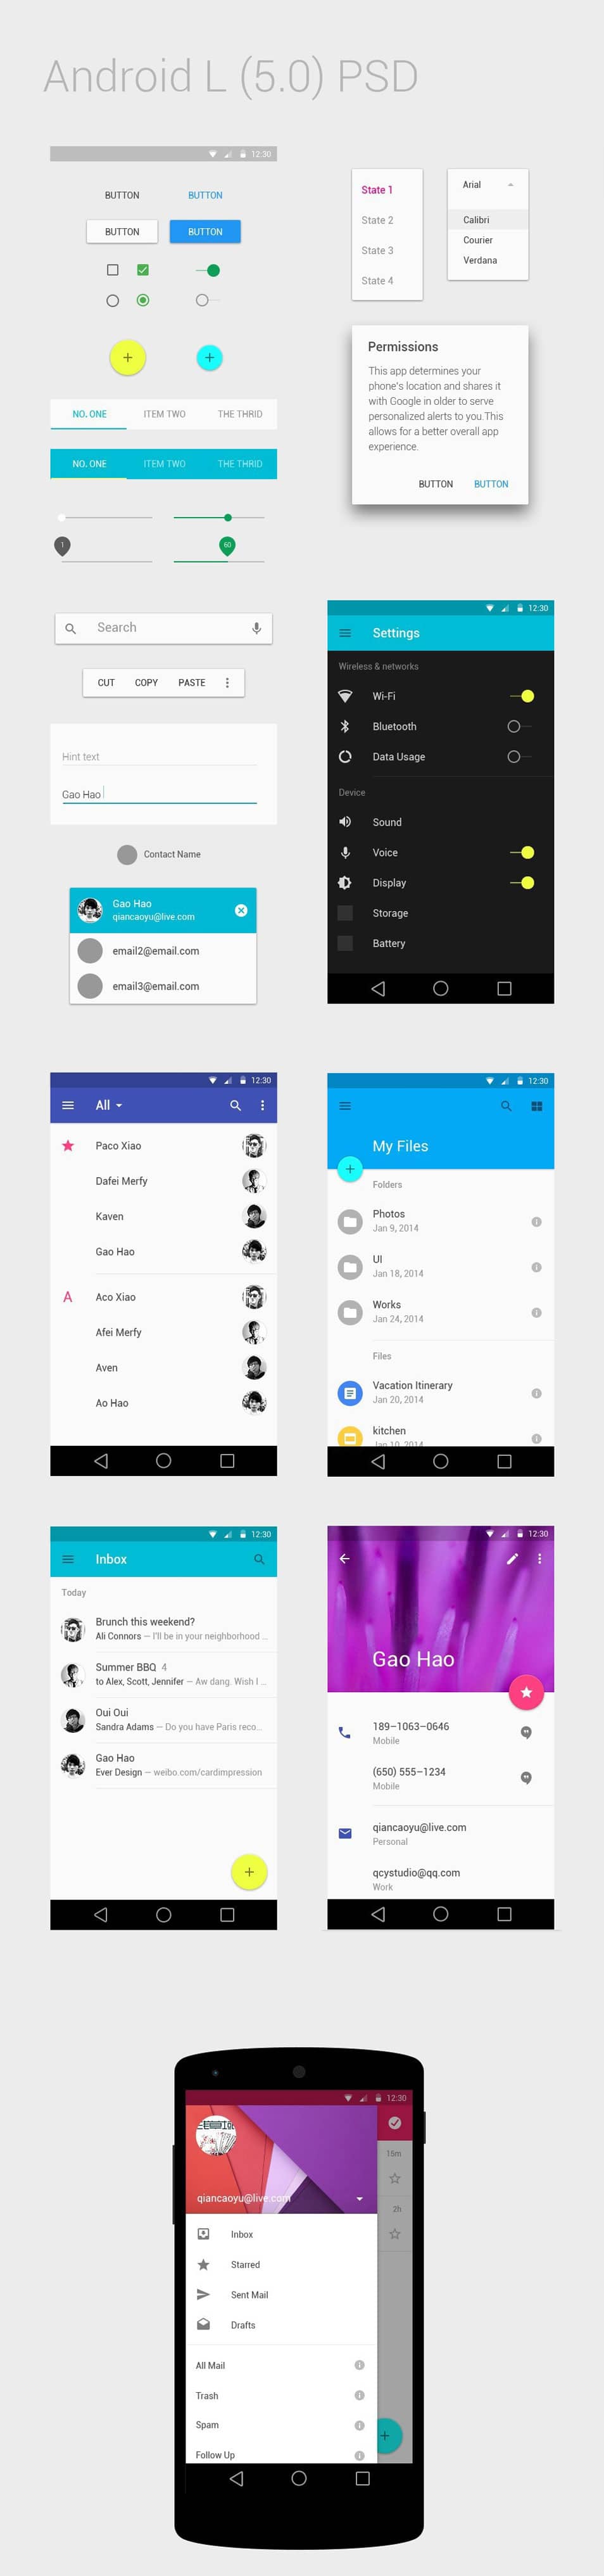 Android L Psd